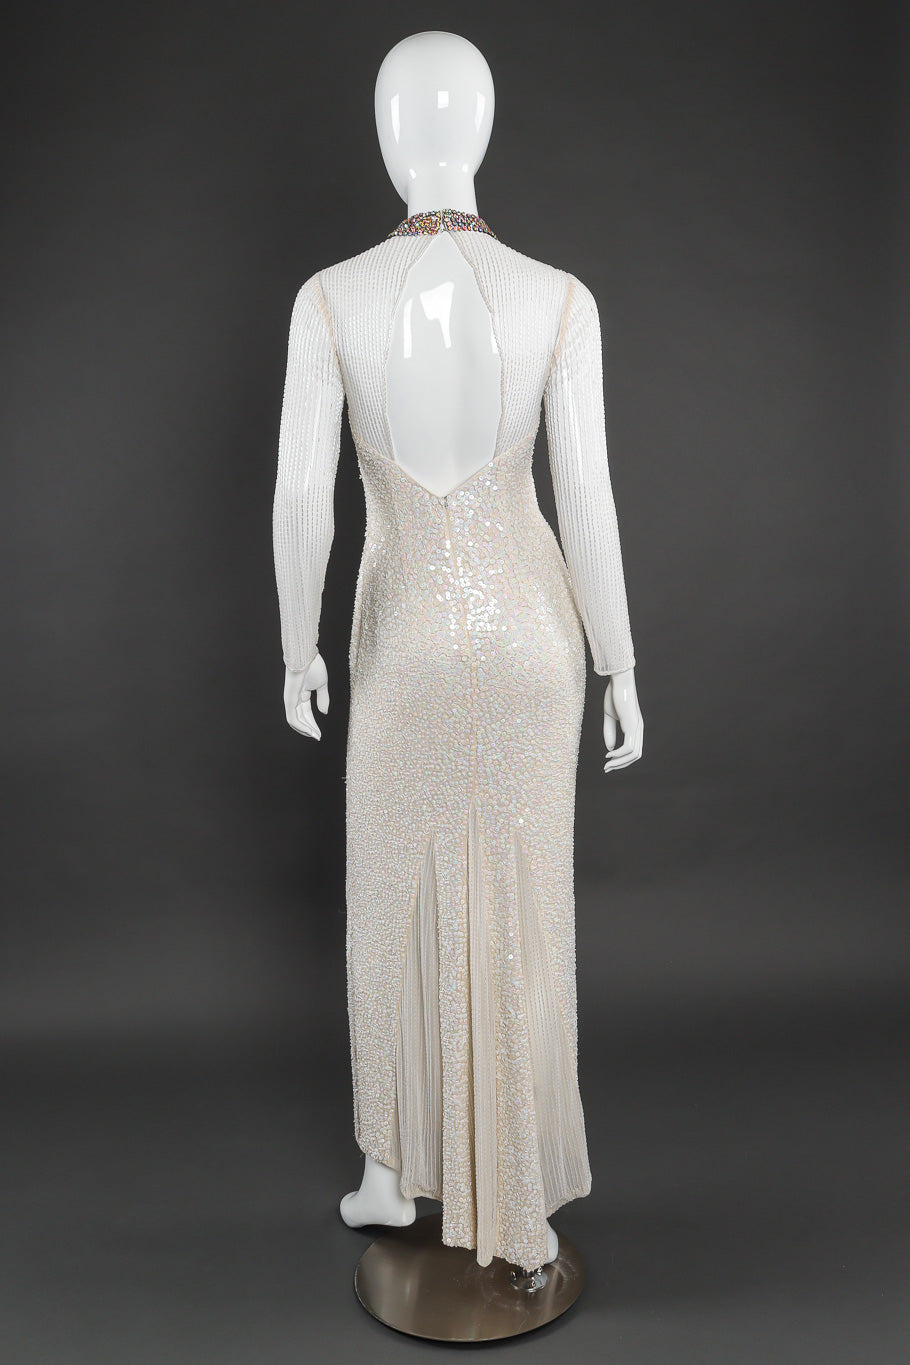 Beaded gown by Lillie Rubin on mannequin back @recessla